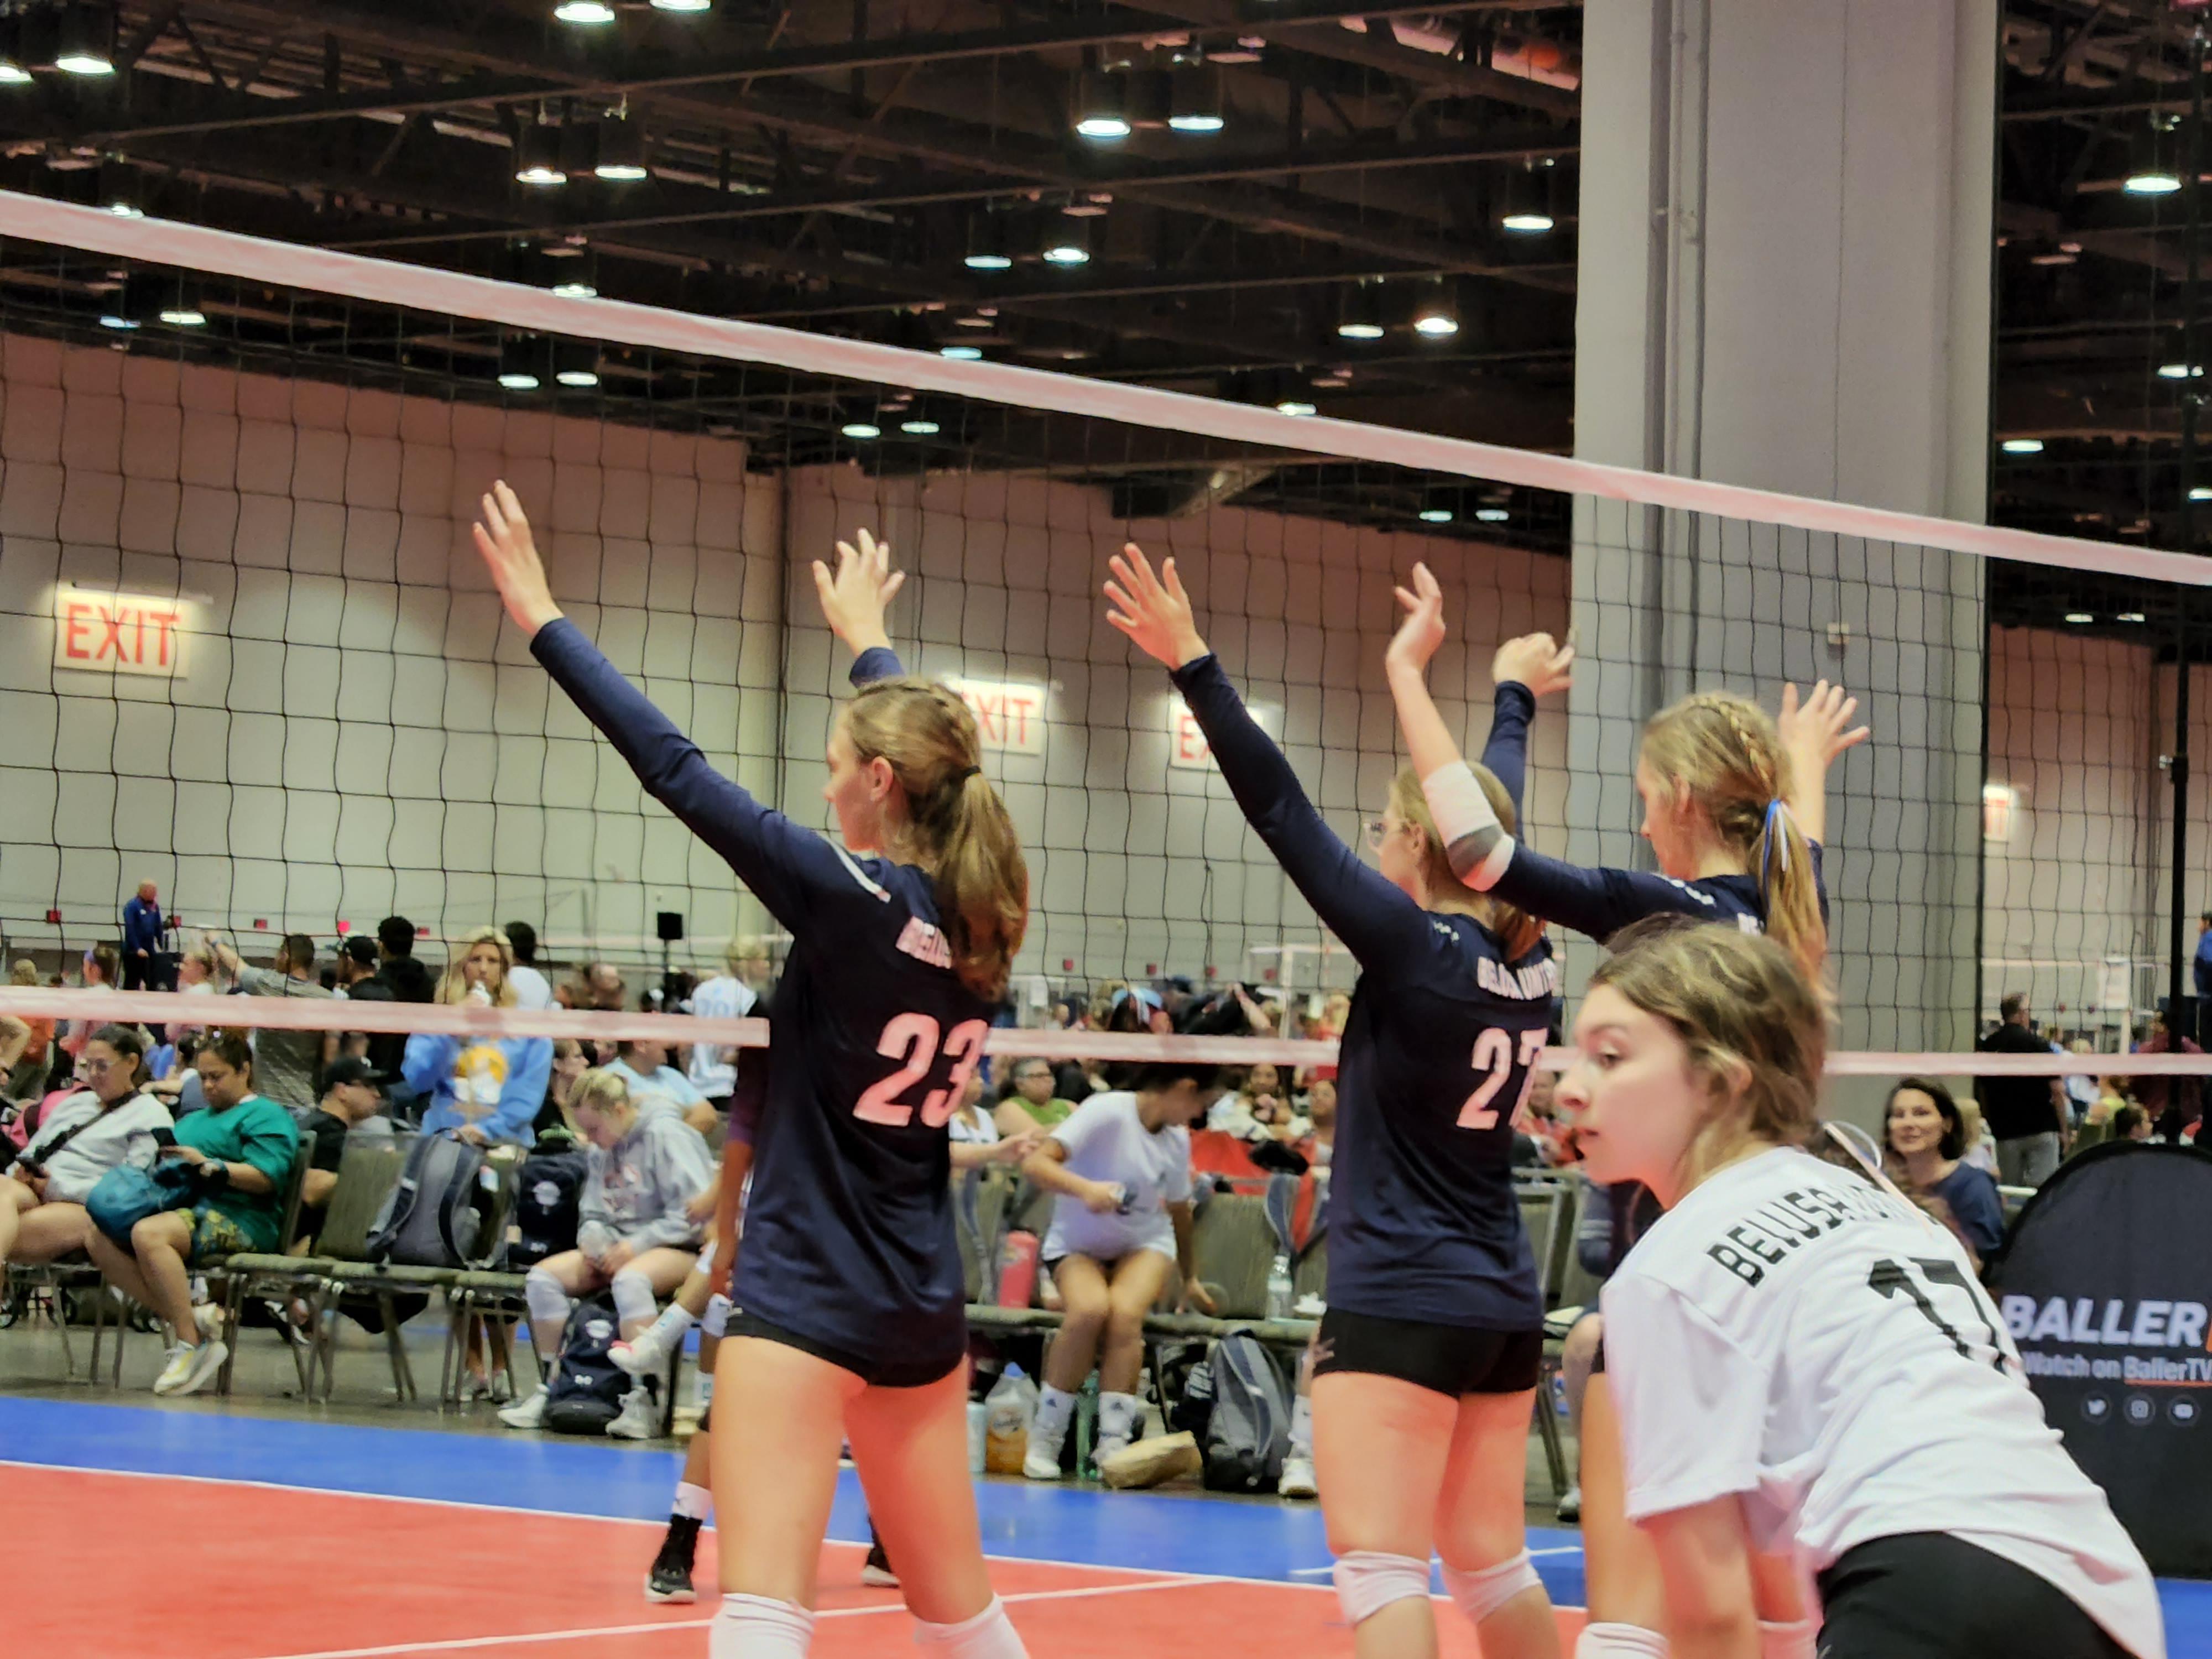 Compete at the highest level by participating in volleyball tournaments organized by Belusa United V Belusa United Volleyball Club Romeoville (815)955-8500